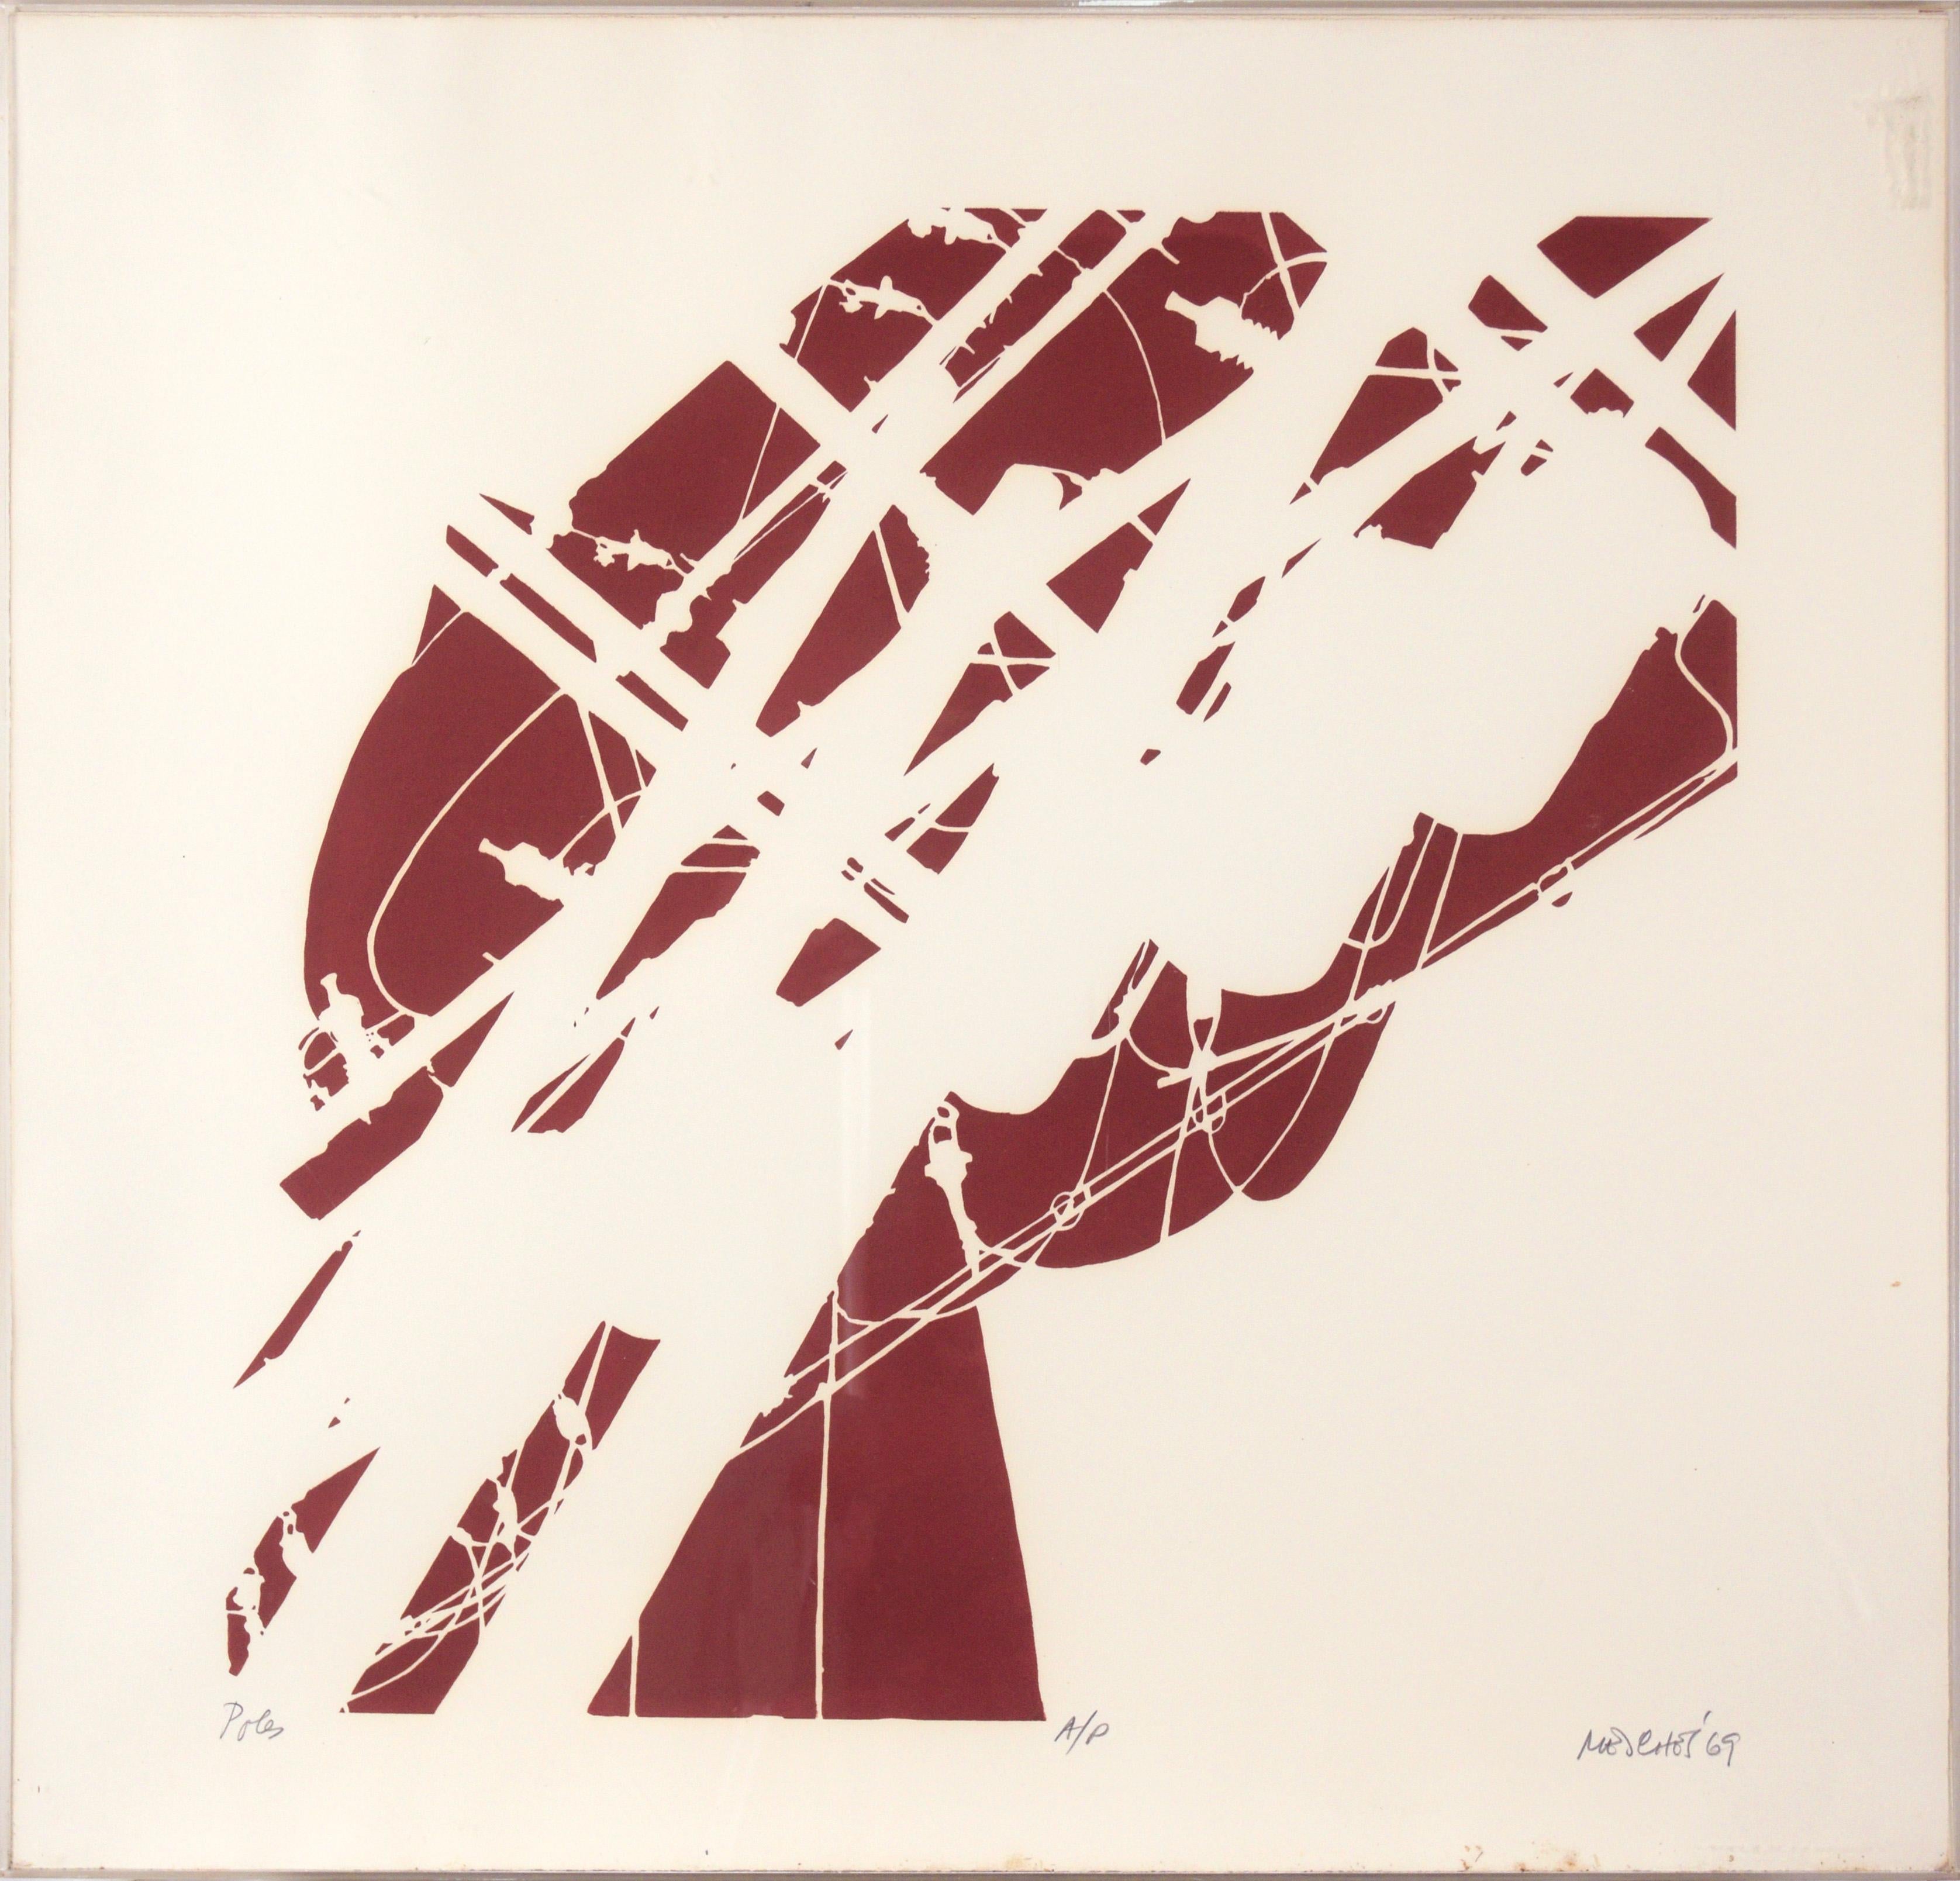 Arnold Mesches Abstract Print - "Poles" Minimalist Abstract Lithograph on Paper